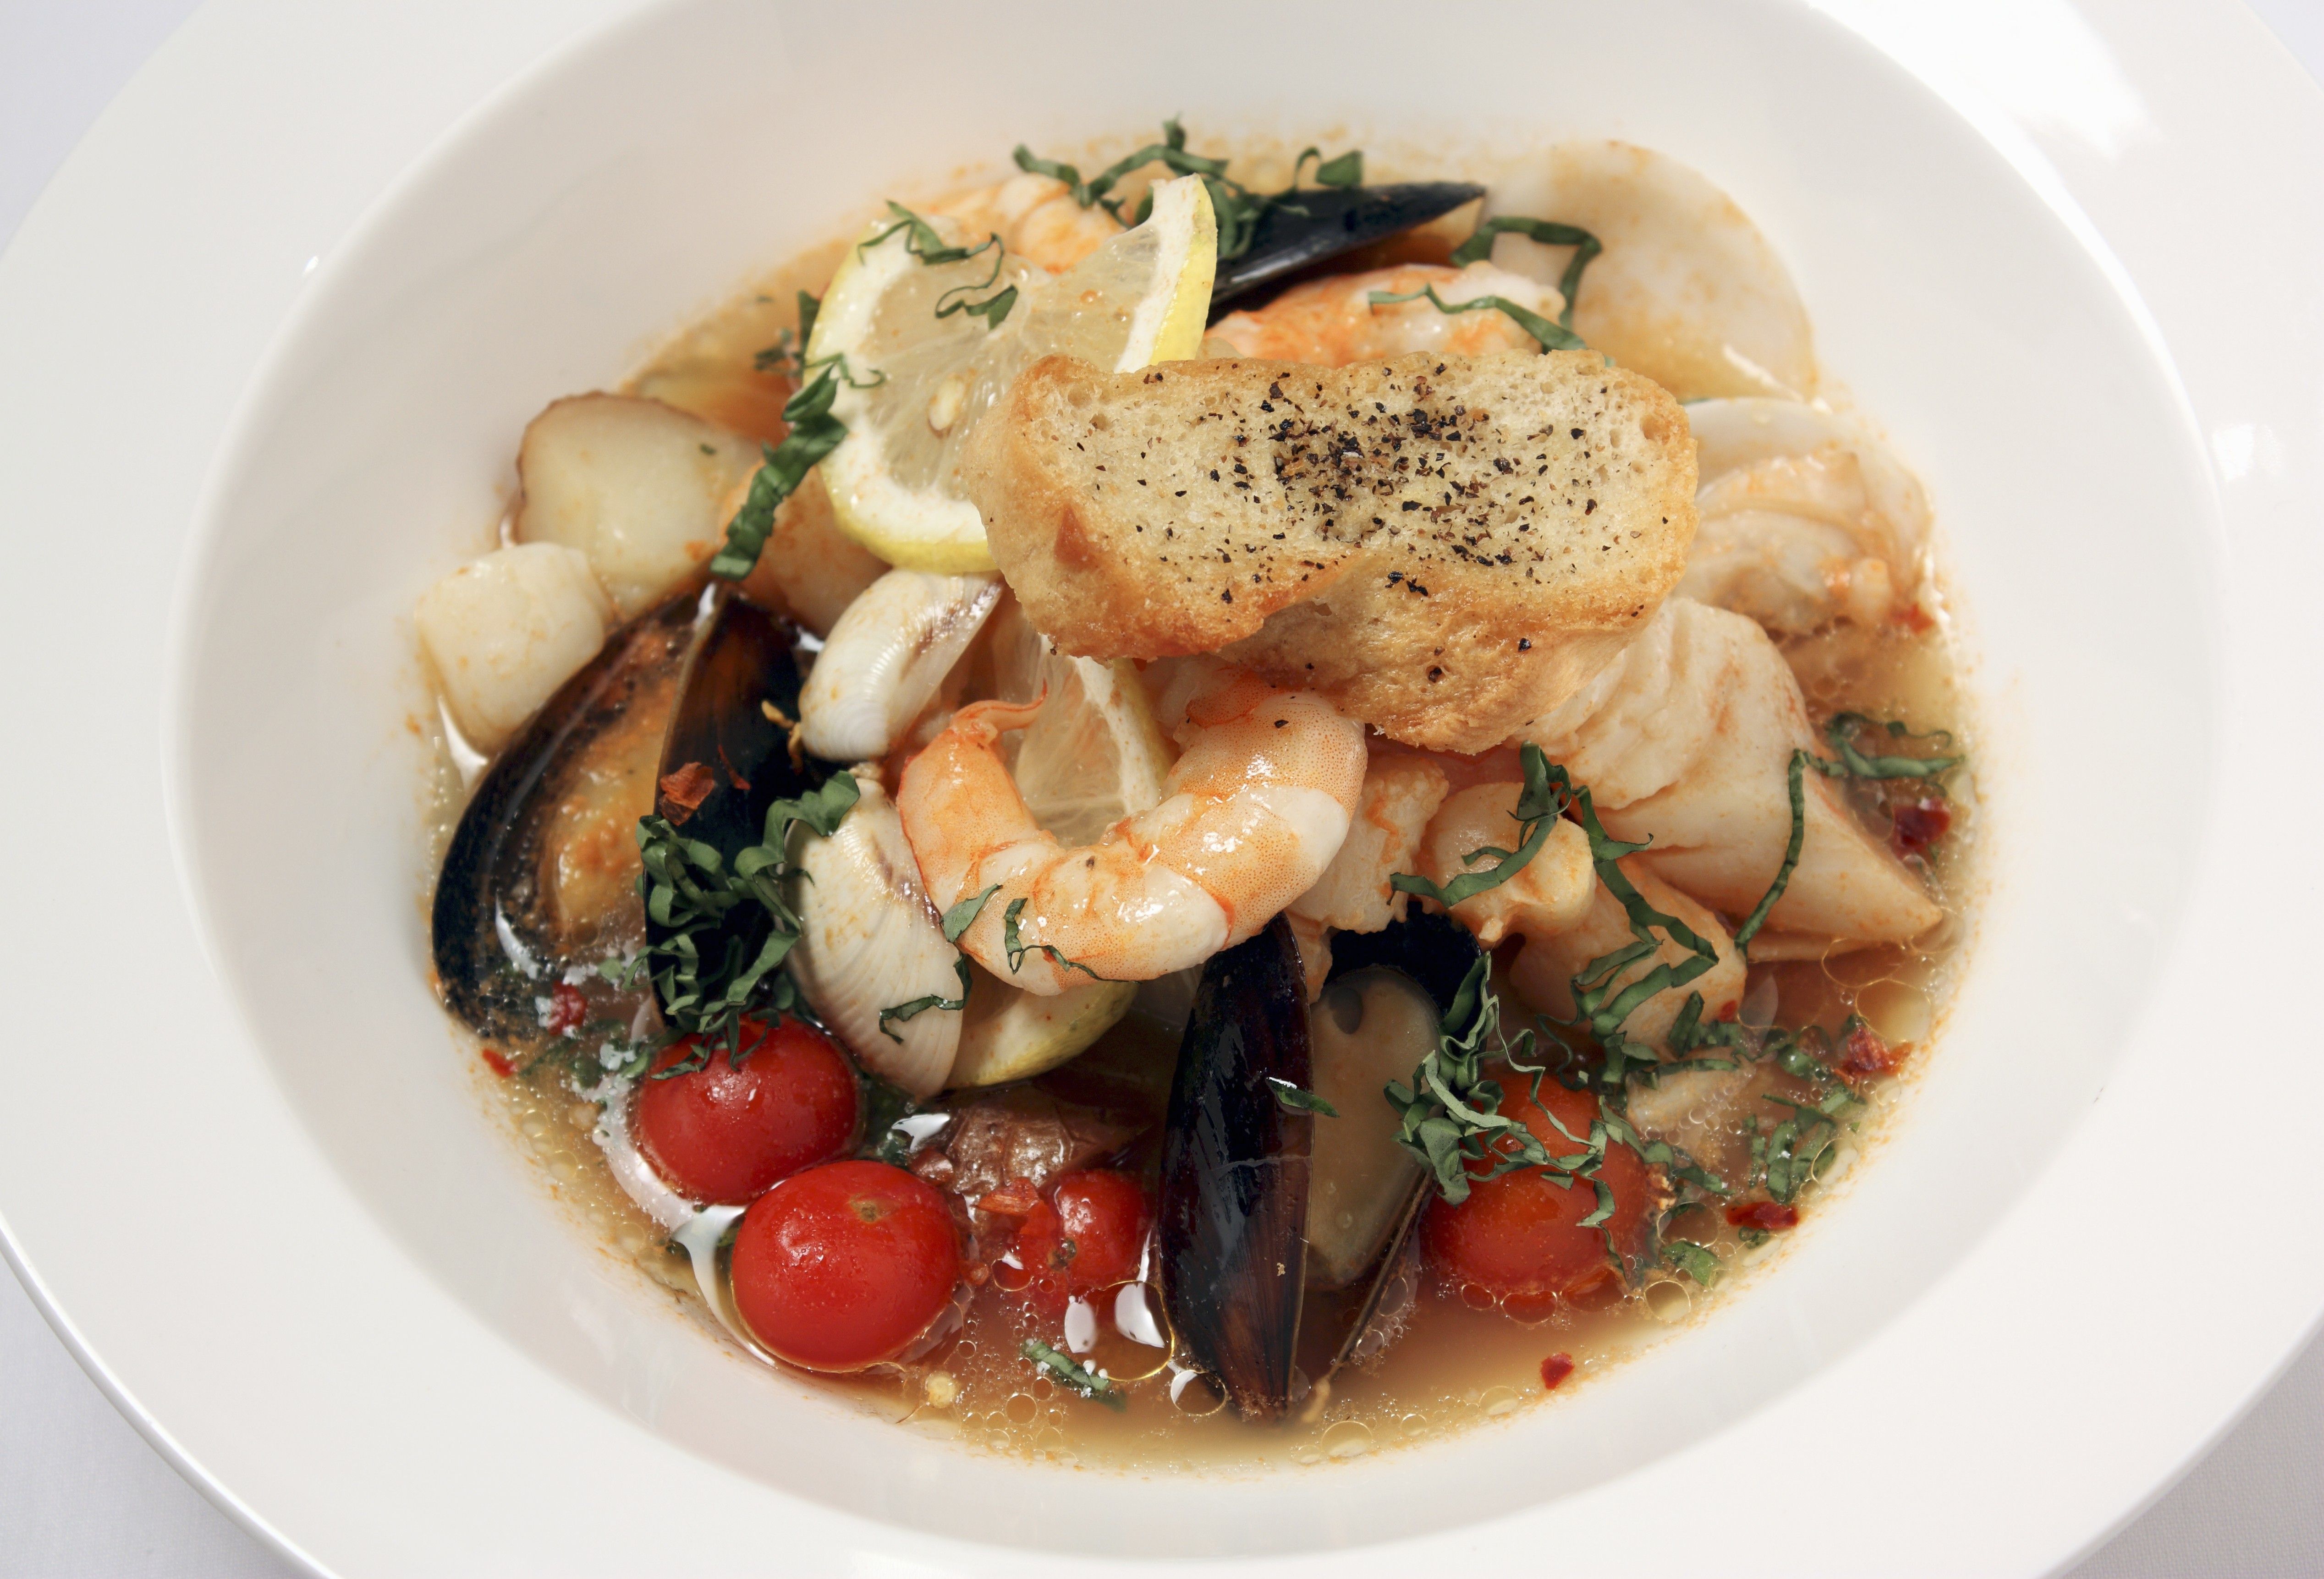 Recipe for Bouillabaisse, a Classic Seafood Stew